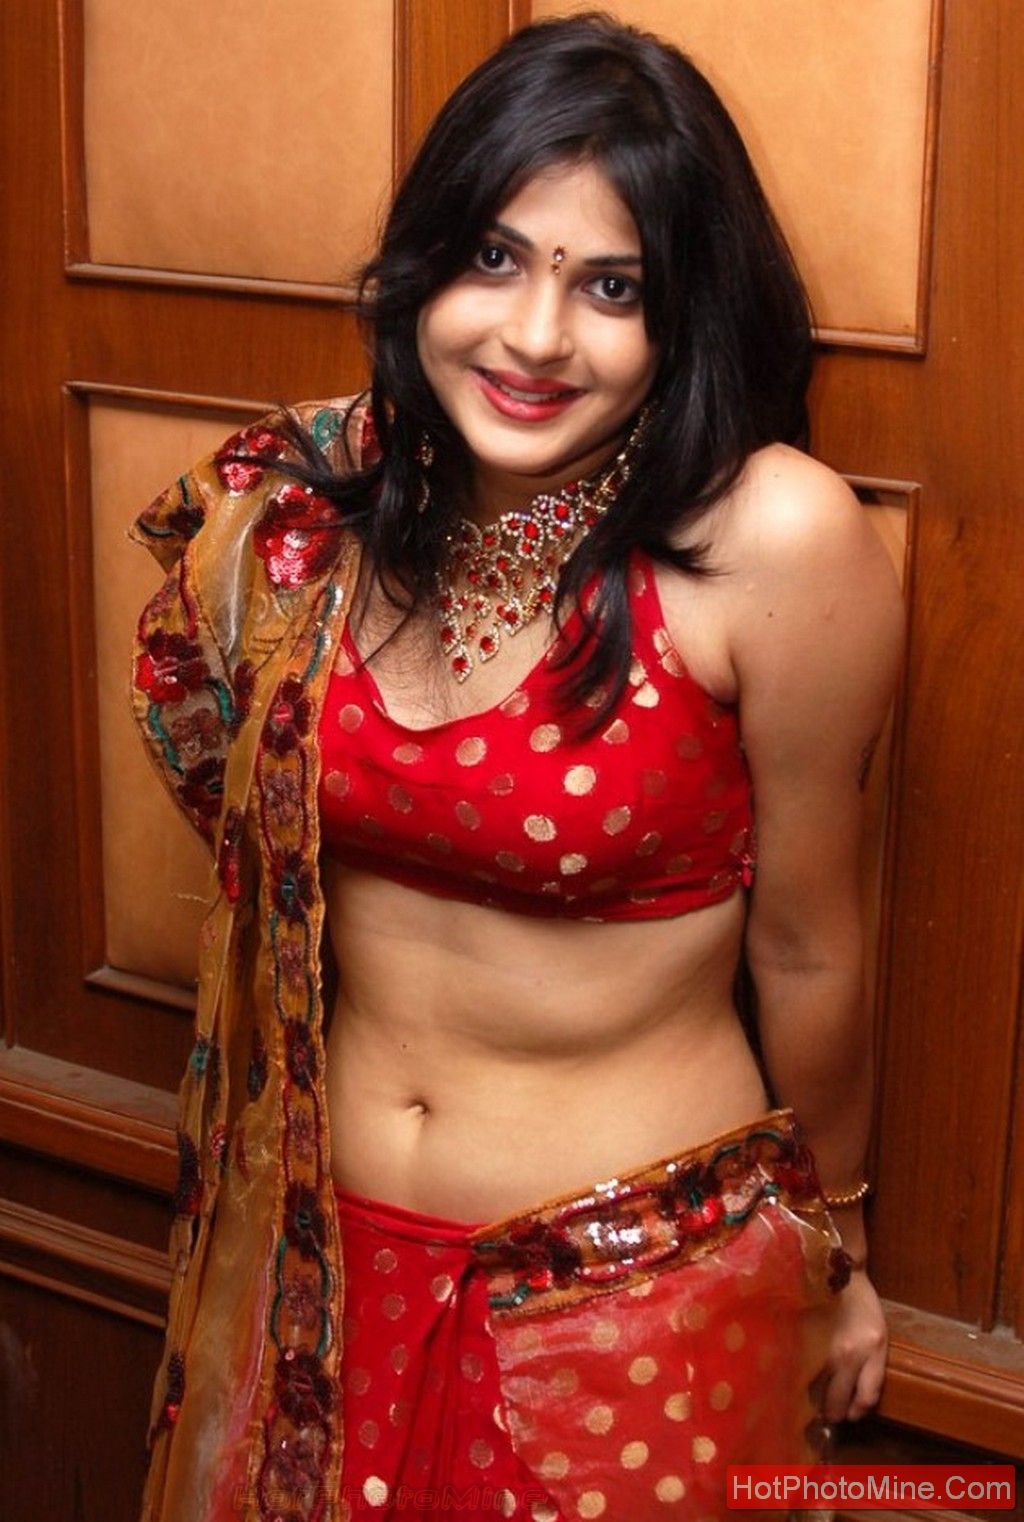 Indian sex photo heroin south indian sex photo hd HOT porno Free pic pic